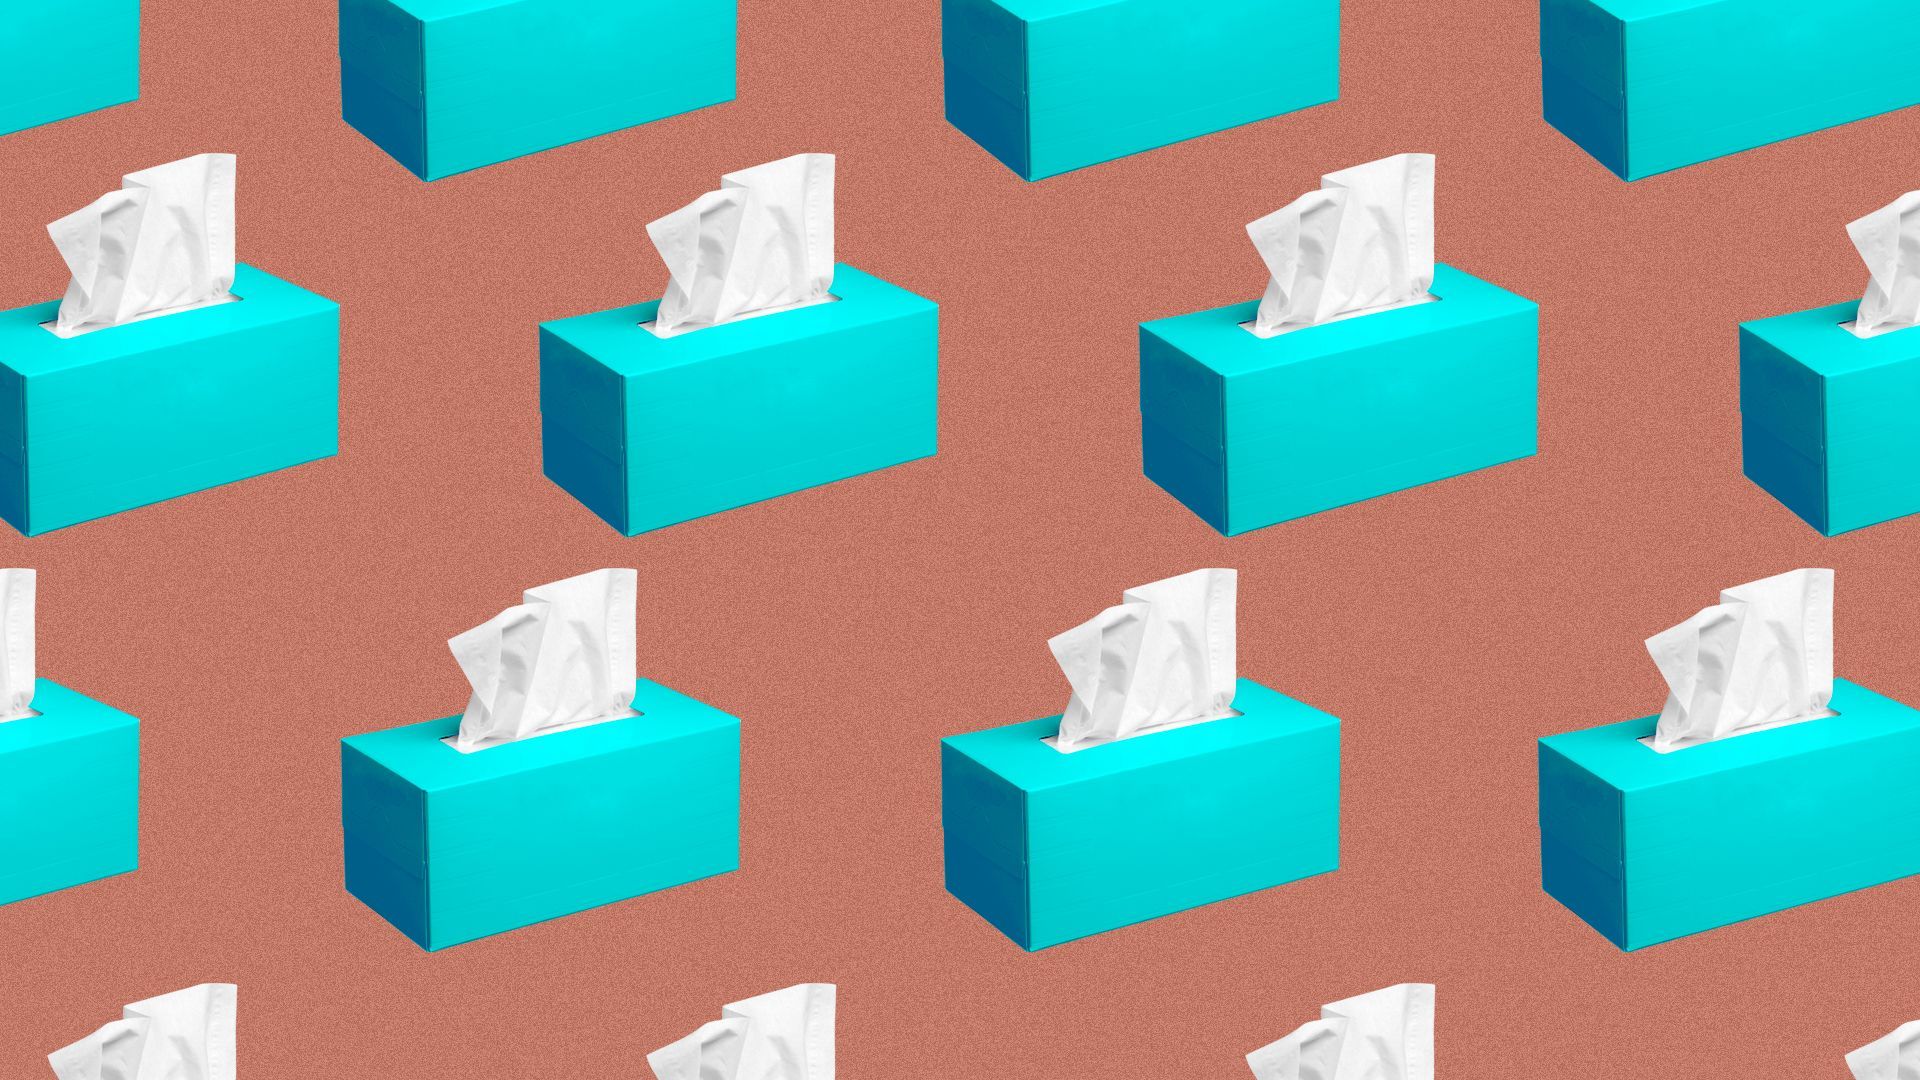 Illustration of a pattern of tissue boxes.